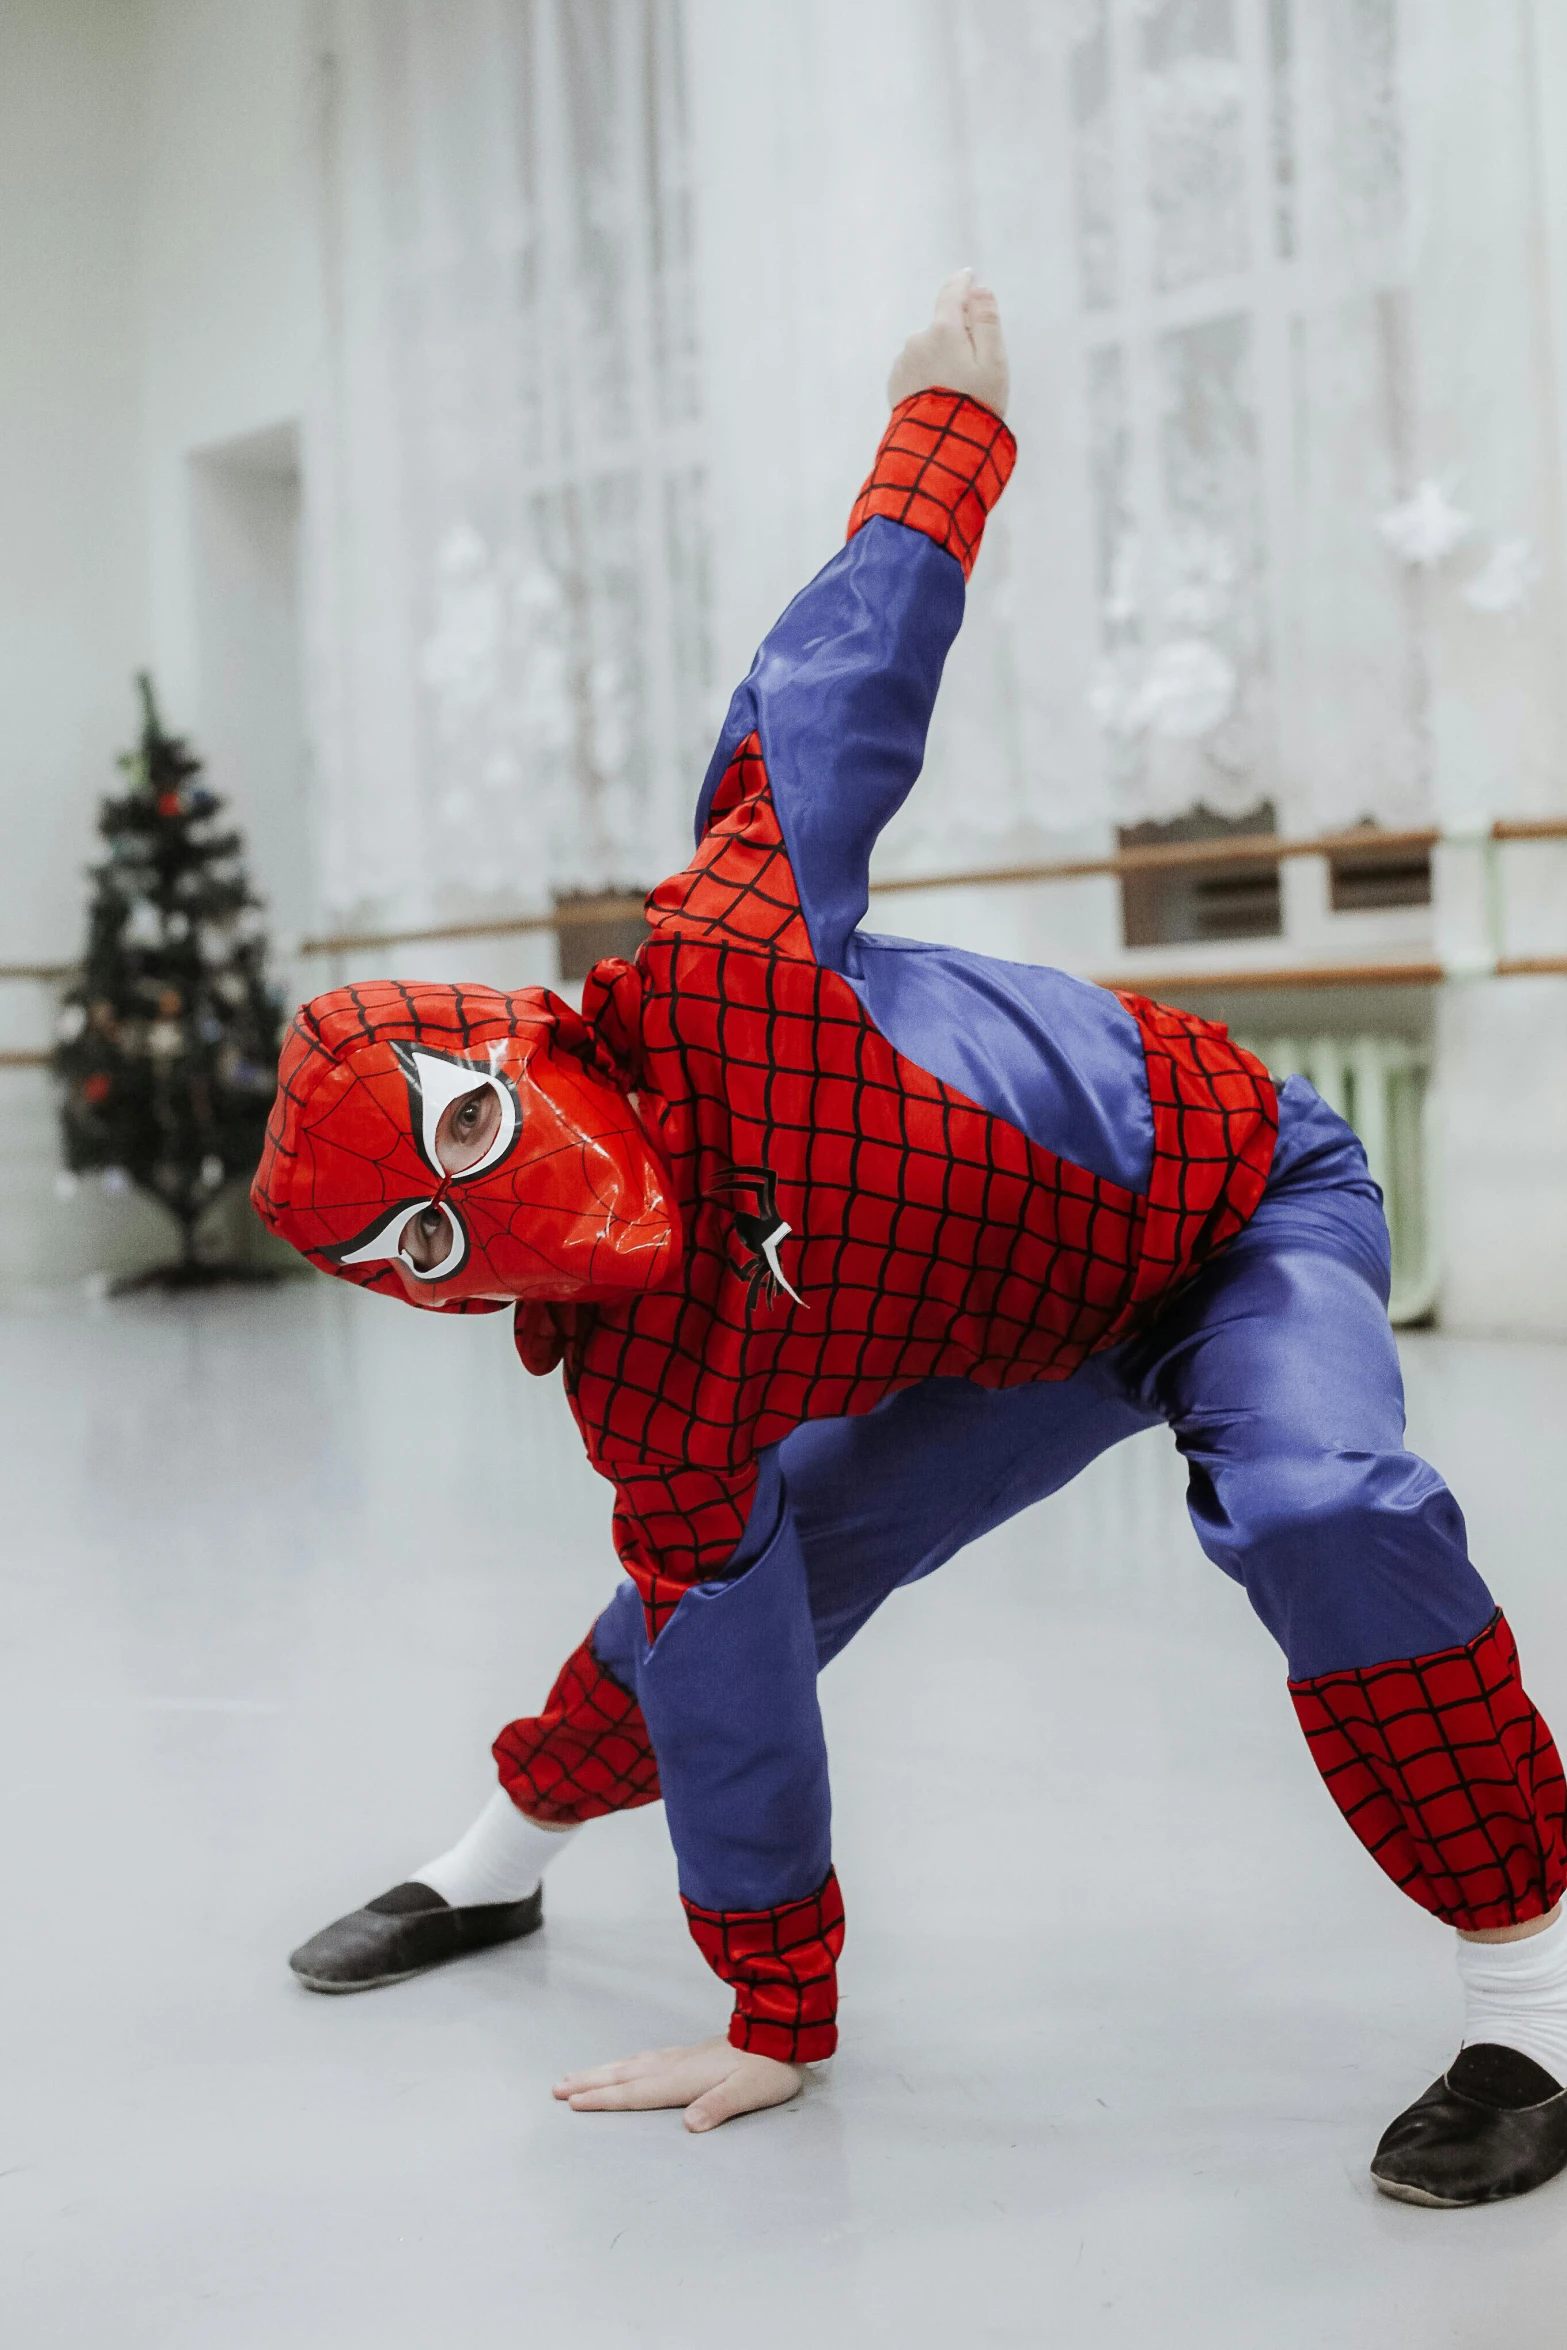 spiderman doing a sidehand maneuver in the dance studio